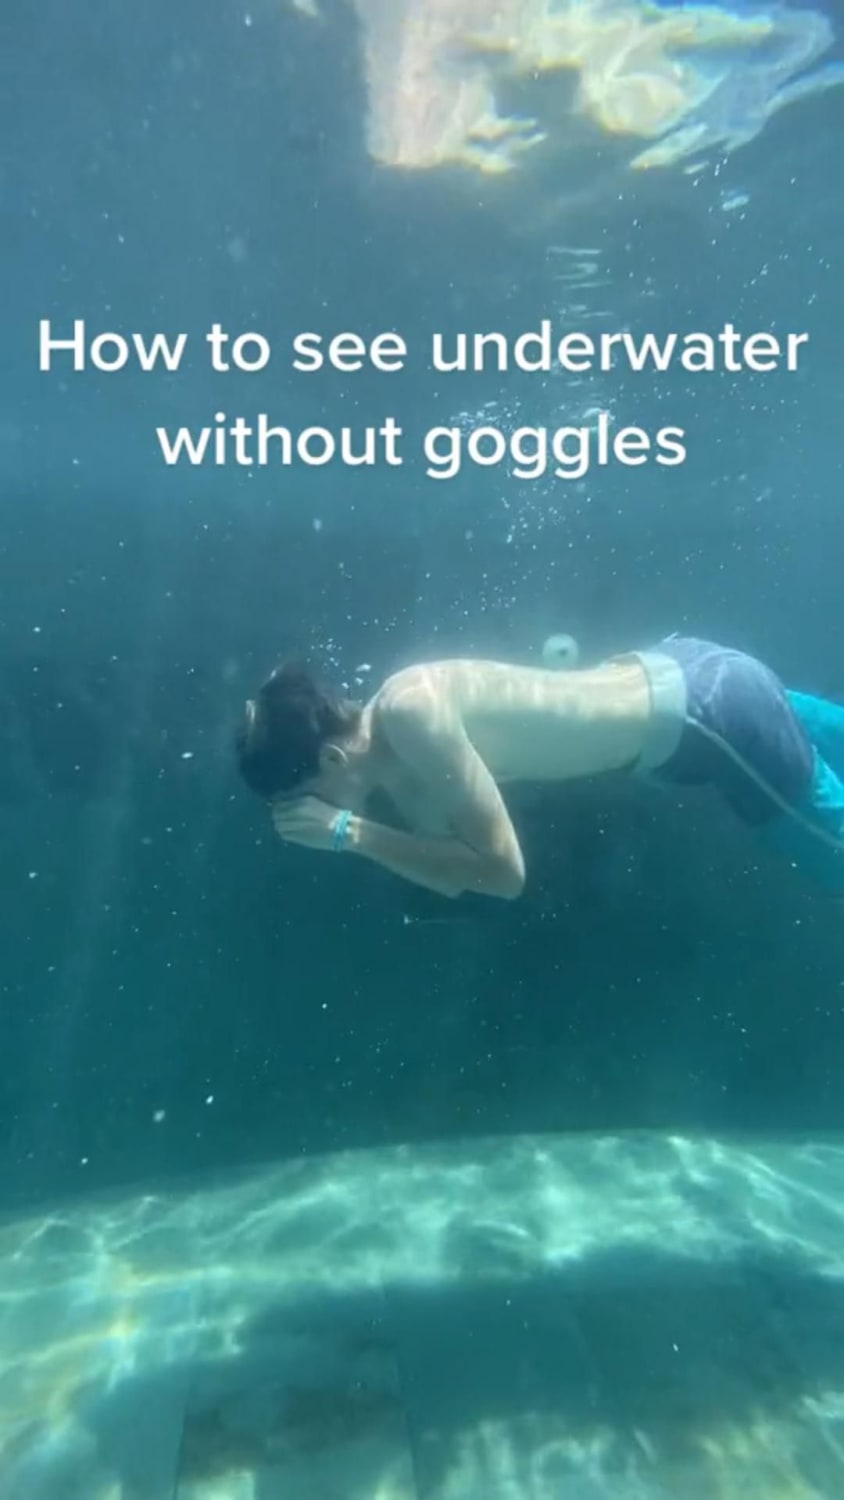 How to see underwater without goggles